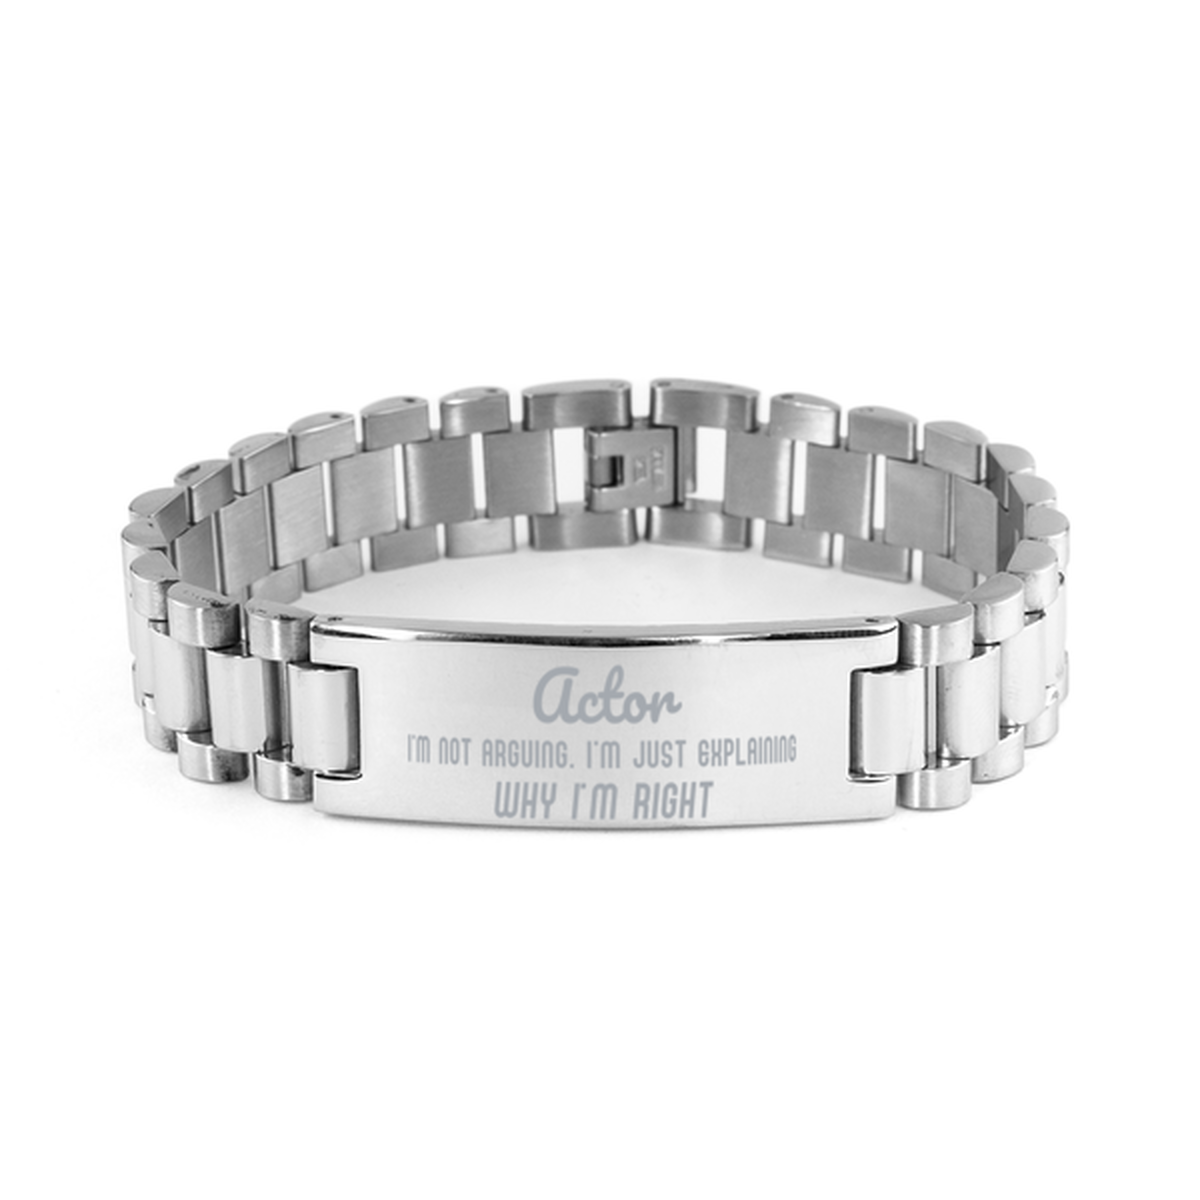 Actor I'm not Arguing. I'm Just Explaining Why I'm RIGHT Ladder Stainless Steel Bracelet, Graduation Birthday Christmas Actor Gifts For Actor Funny Saying Quote Present for Men Women Coworker